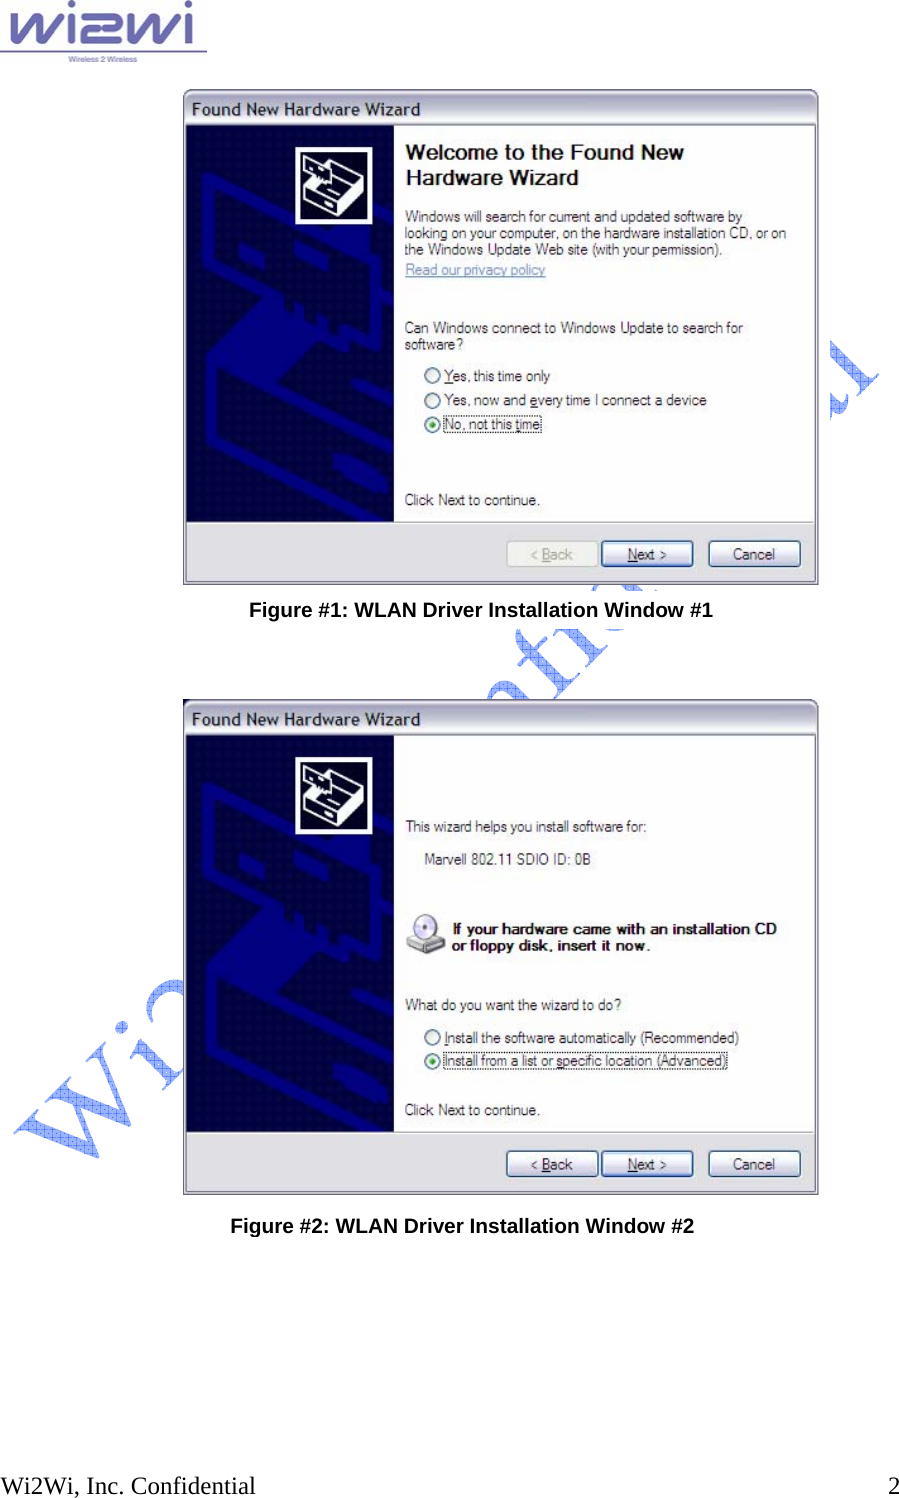   Wi2Wi, Inc. Confidential  2          Figure #1: WLAN Driver Installation Window #1 Figure #2: WLAN Driver Installation Window #2